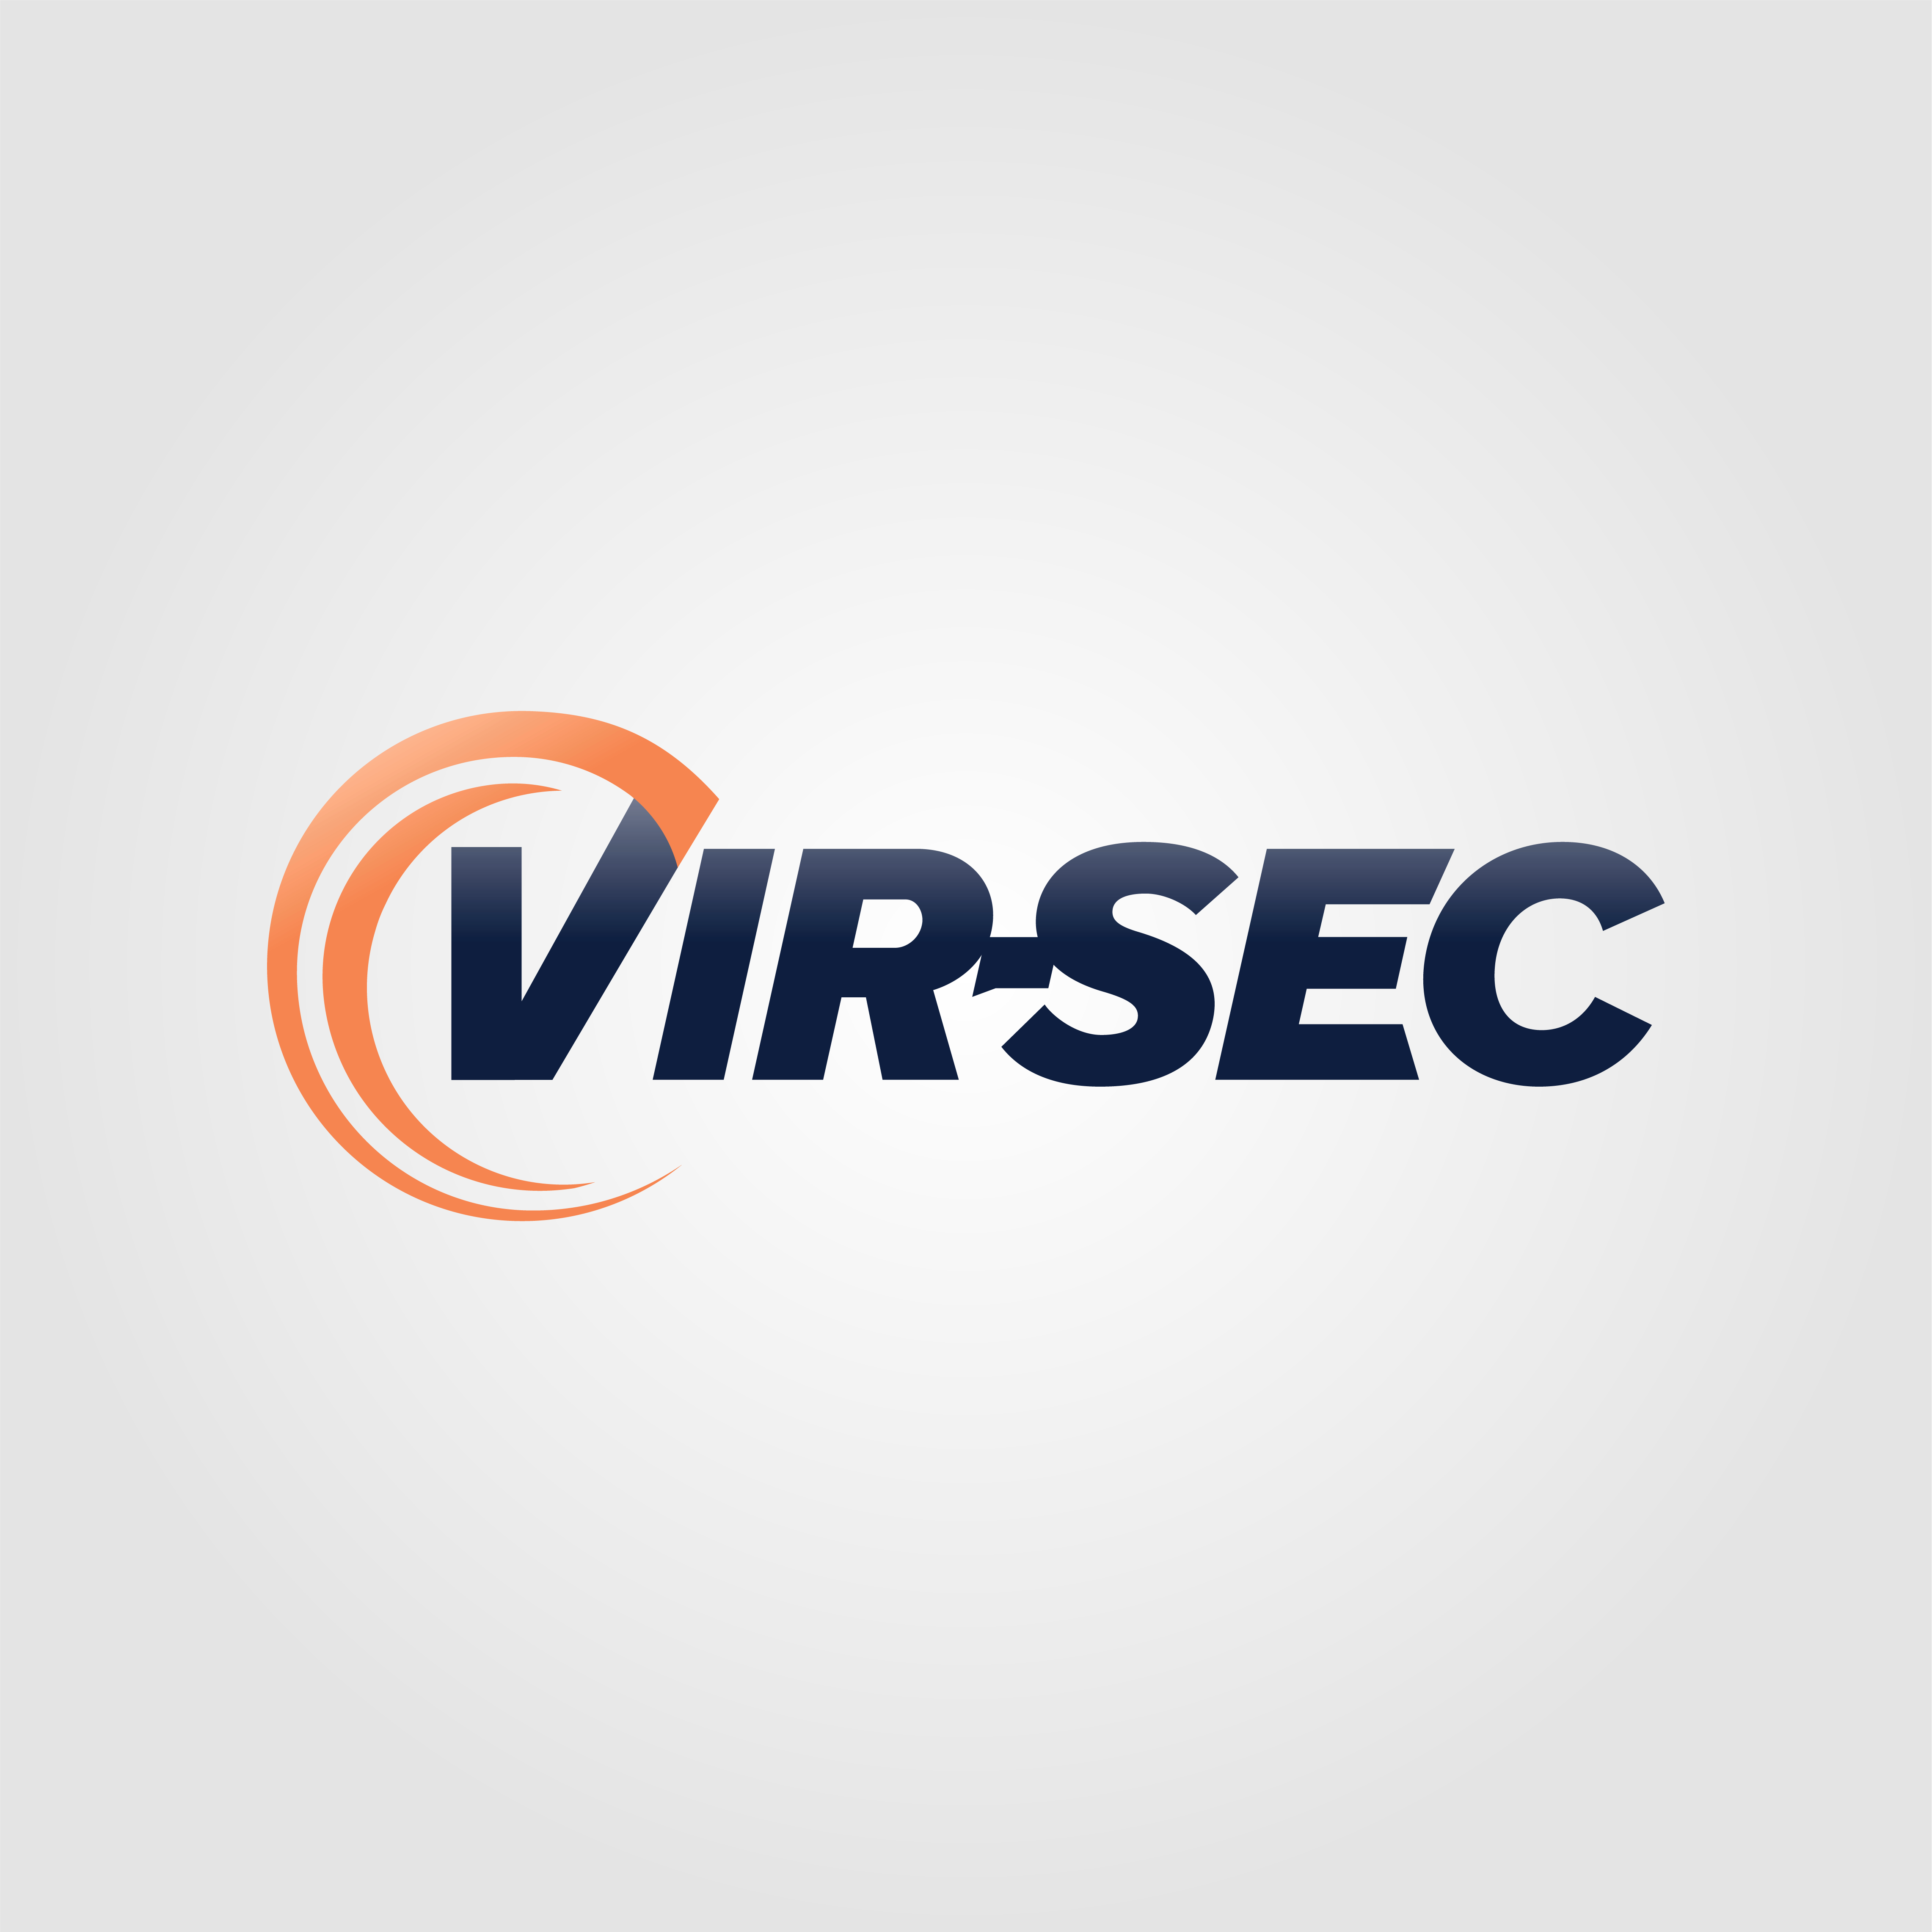 Logo reading VIR-SEC with an orange swish coming out of the top of the V